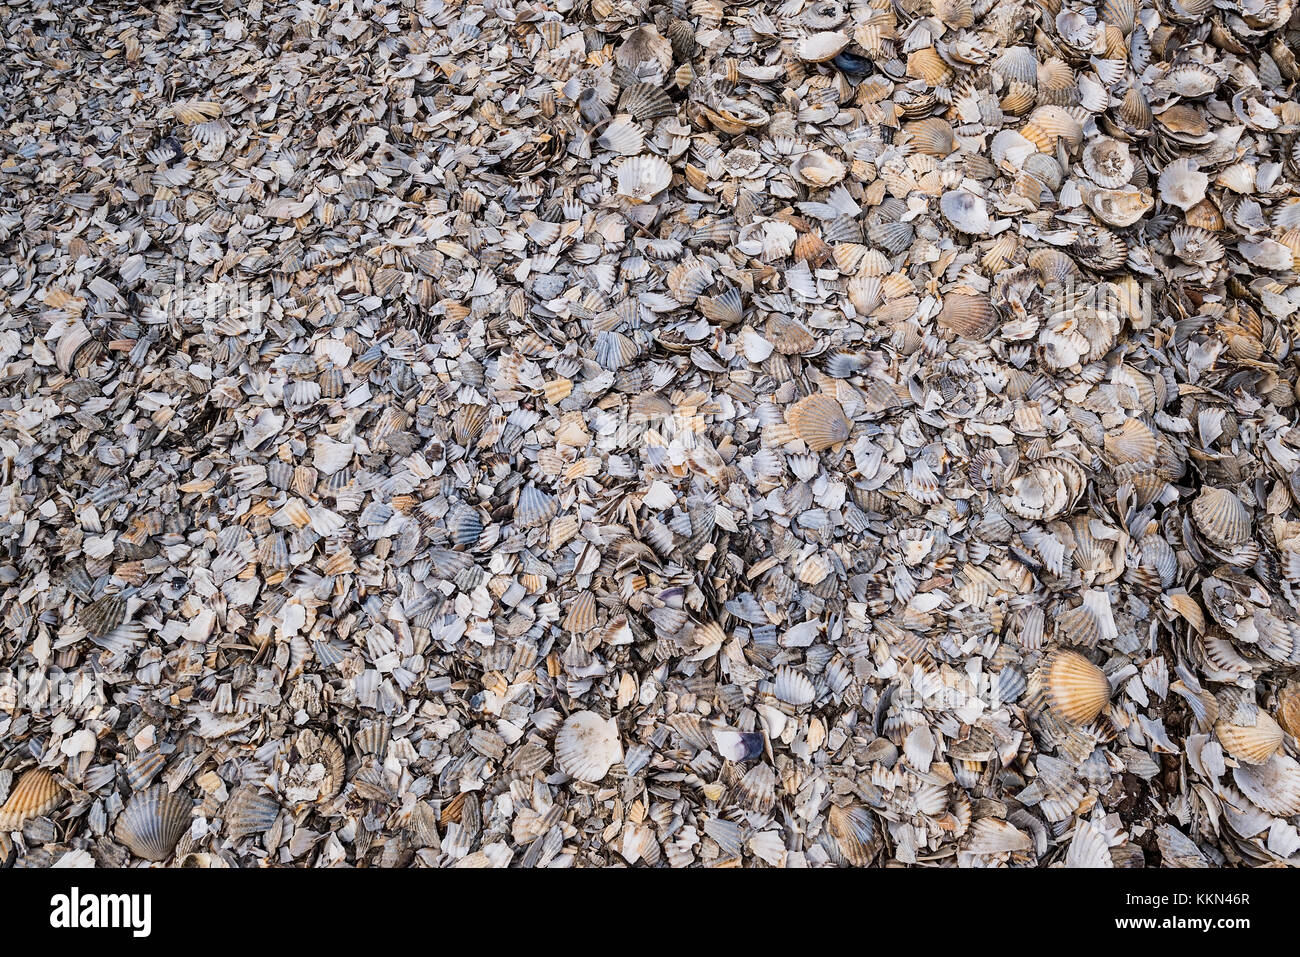 Thousands of small seashells washed up on the beach. Stock Photo